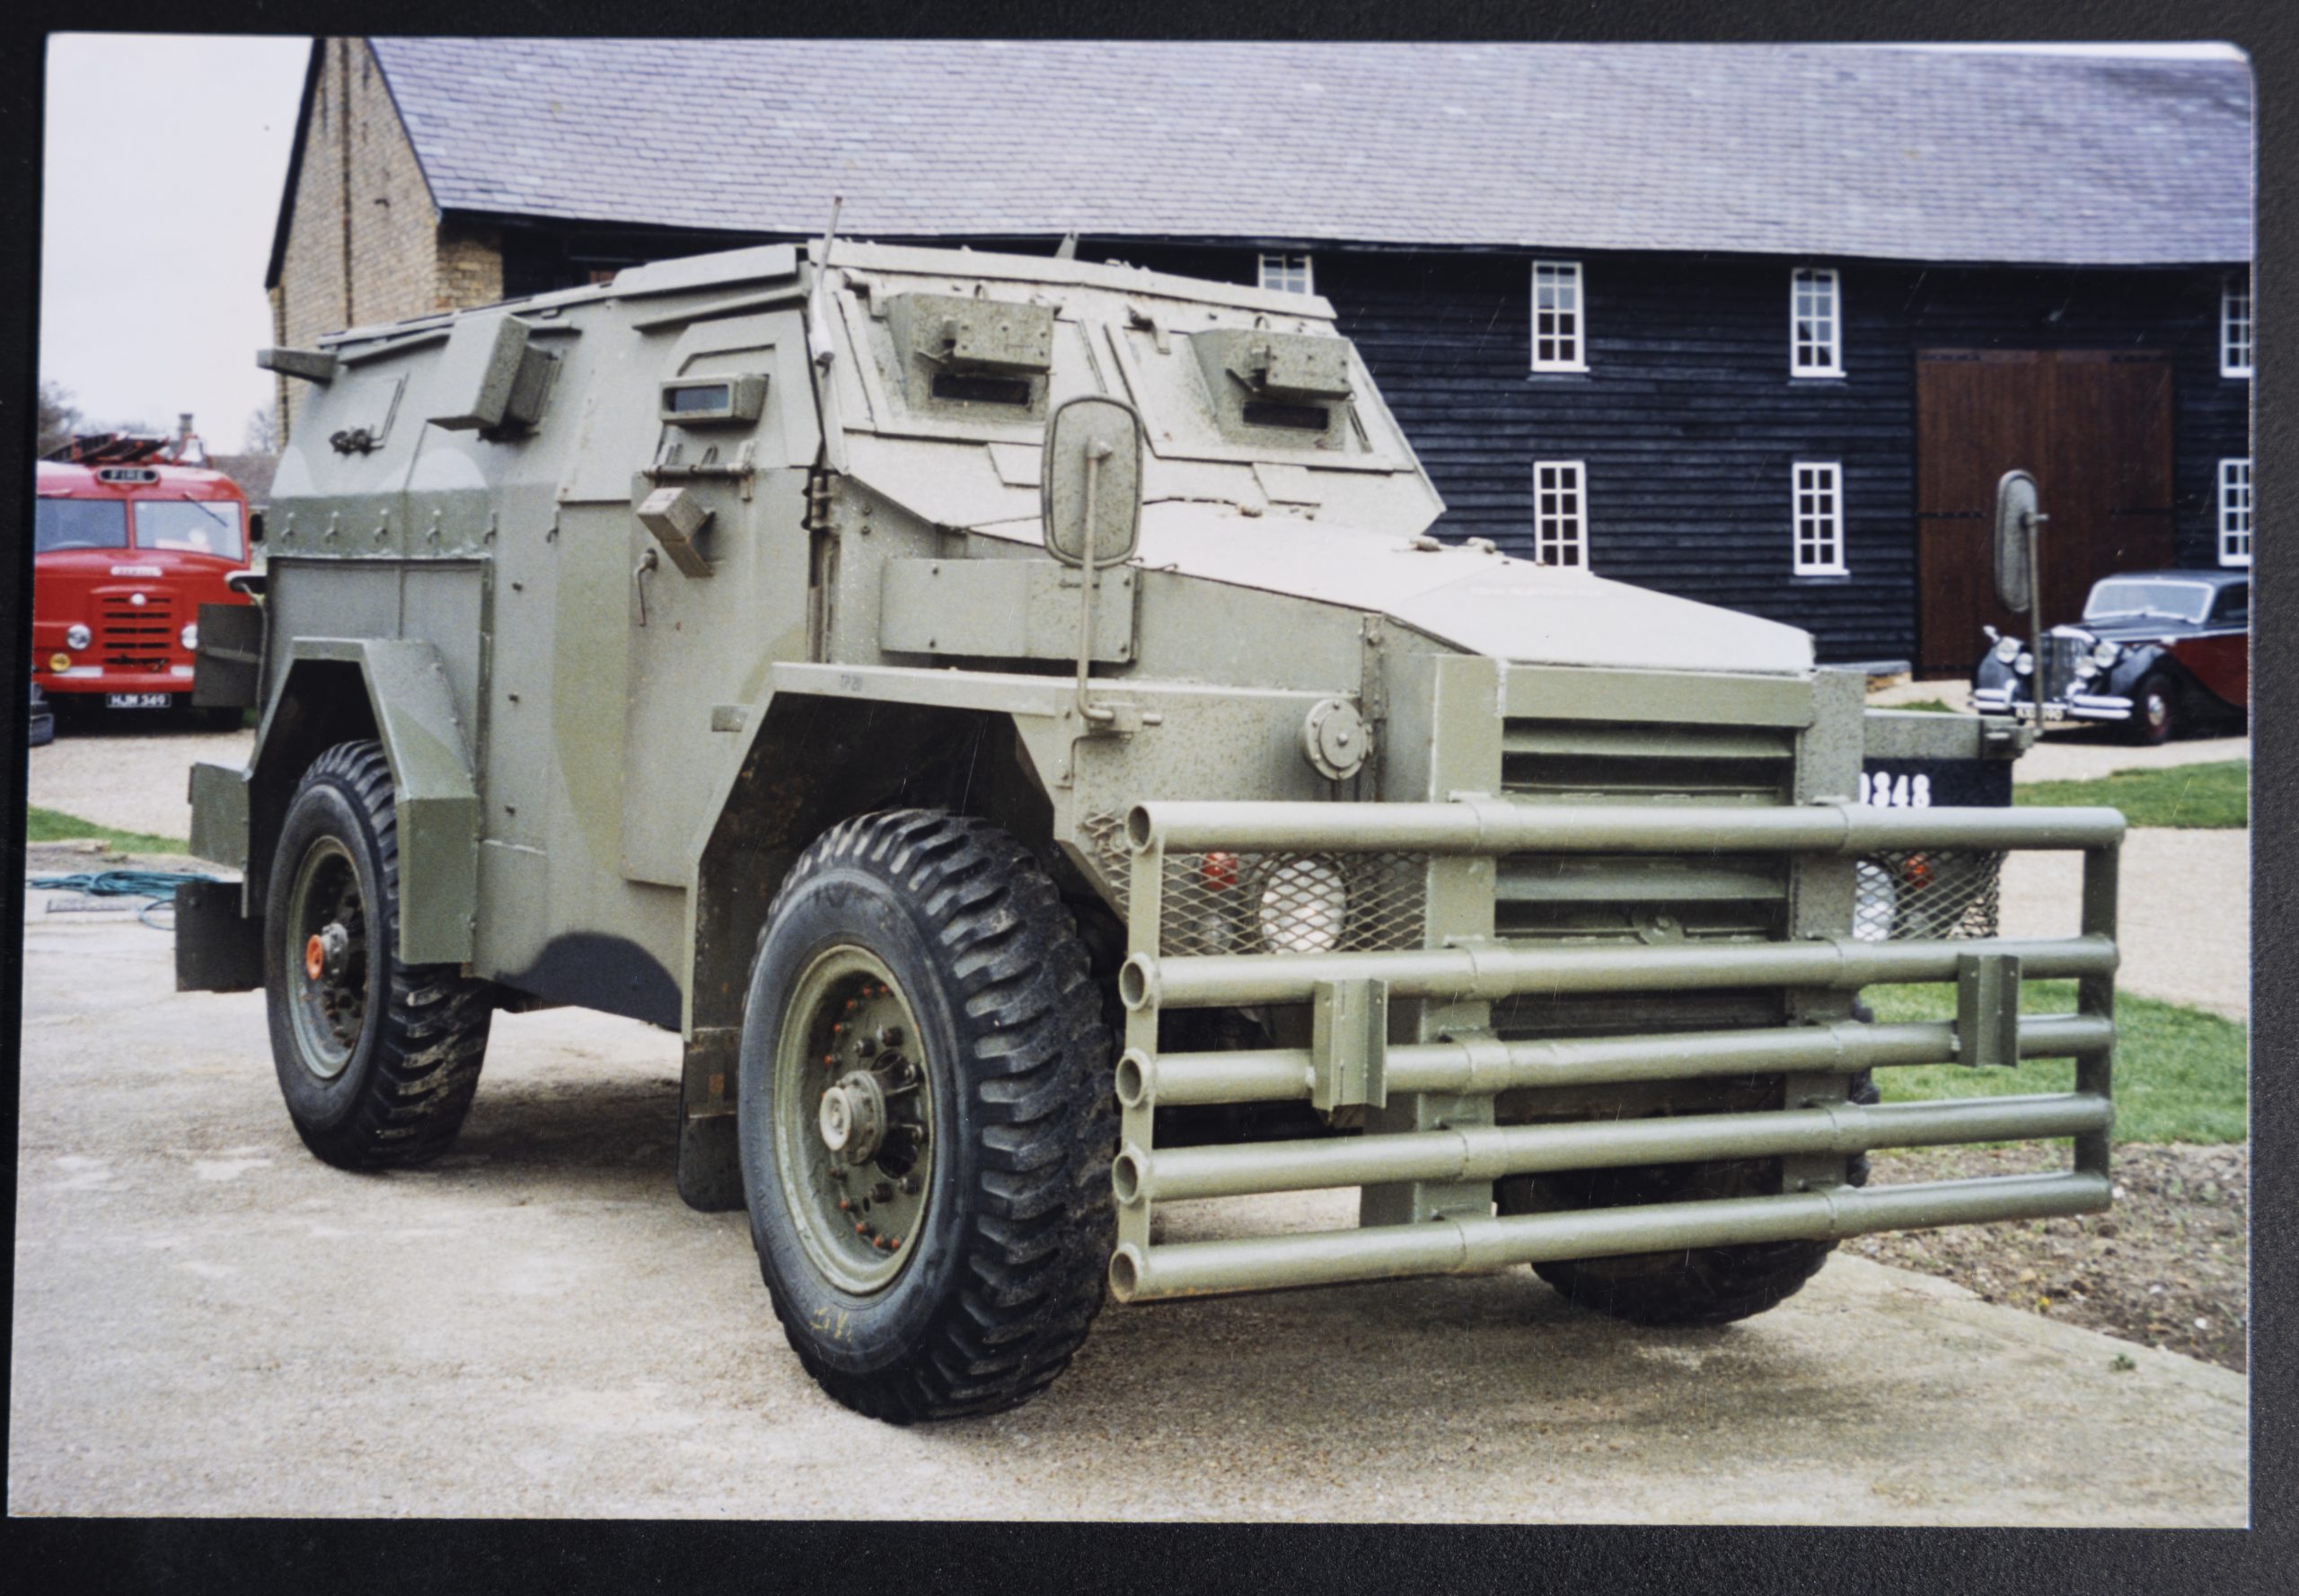 Steve Parrish armoured personnel carrier